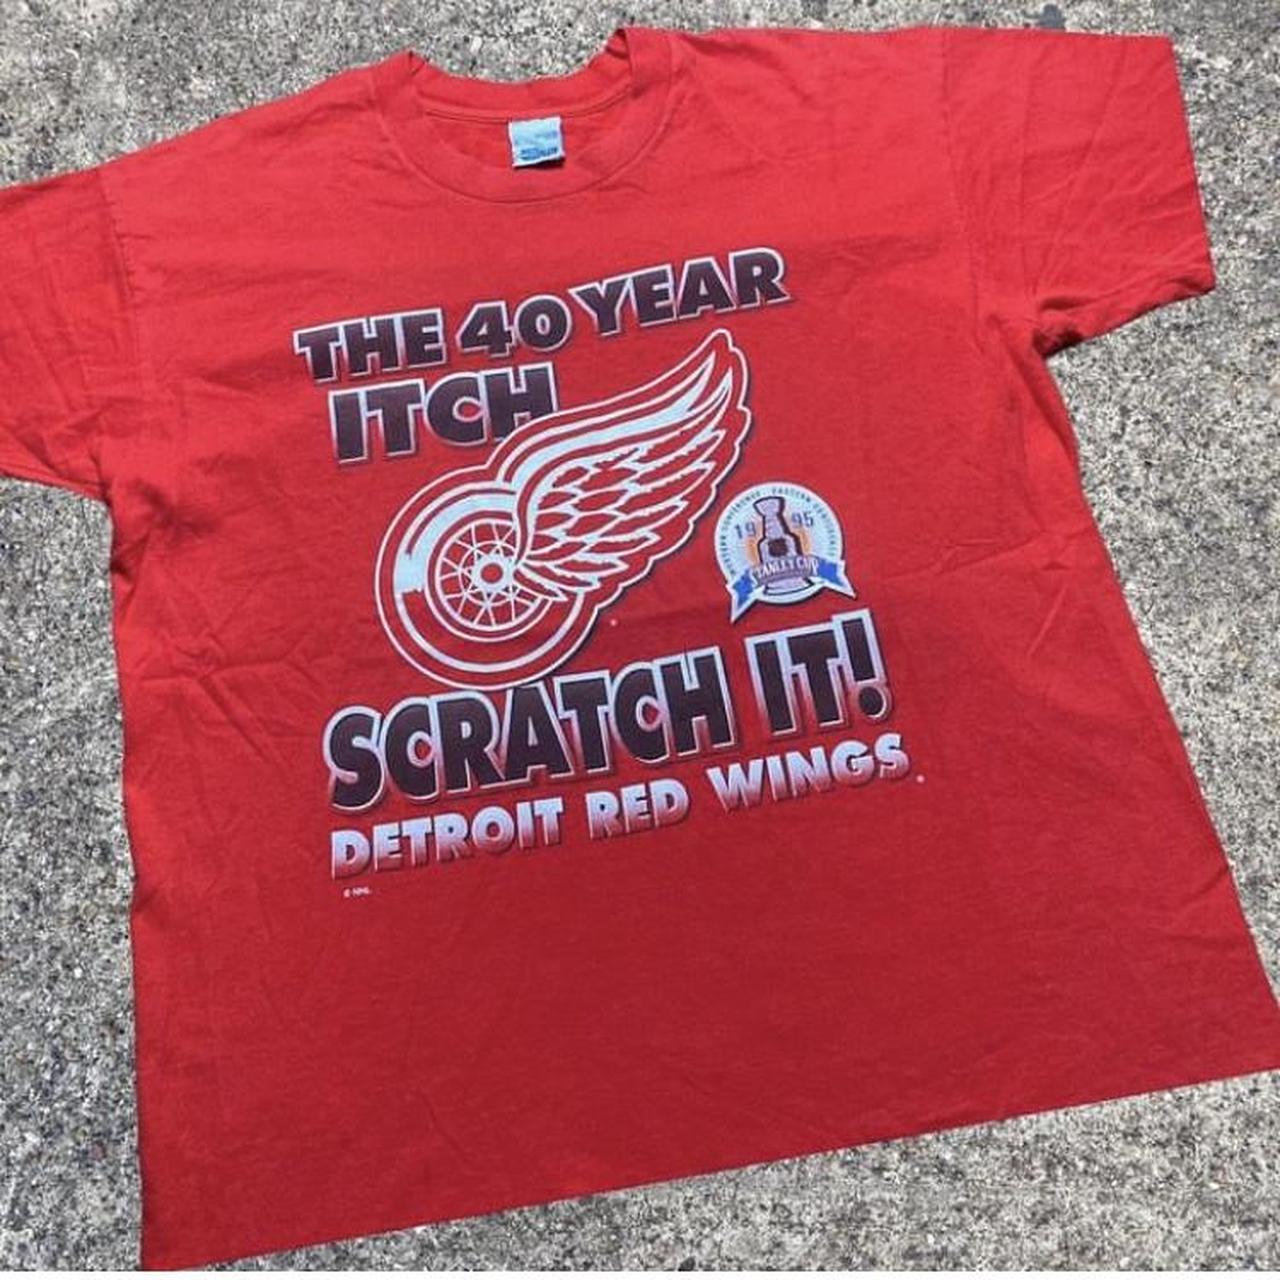 Salem Sportswear, Shirts, Detroit Red Wings Vintage 95 Conference Champs